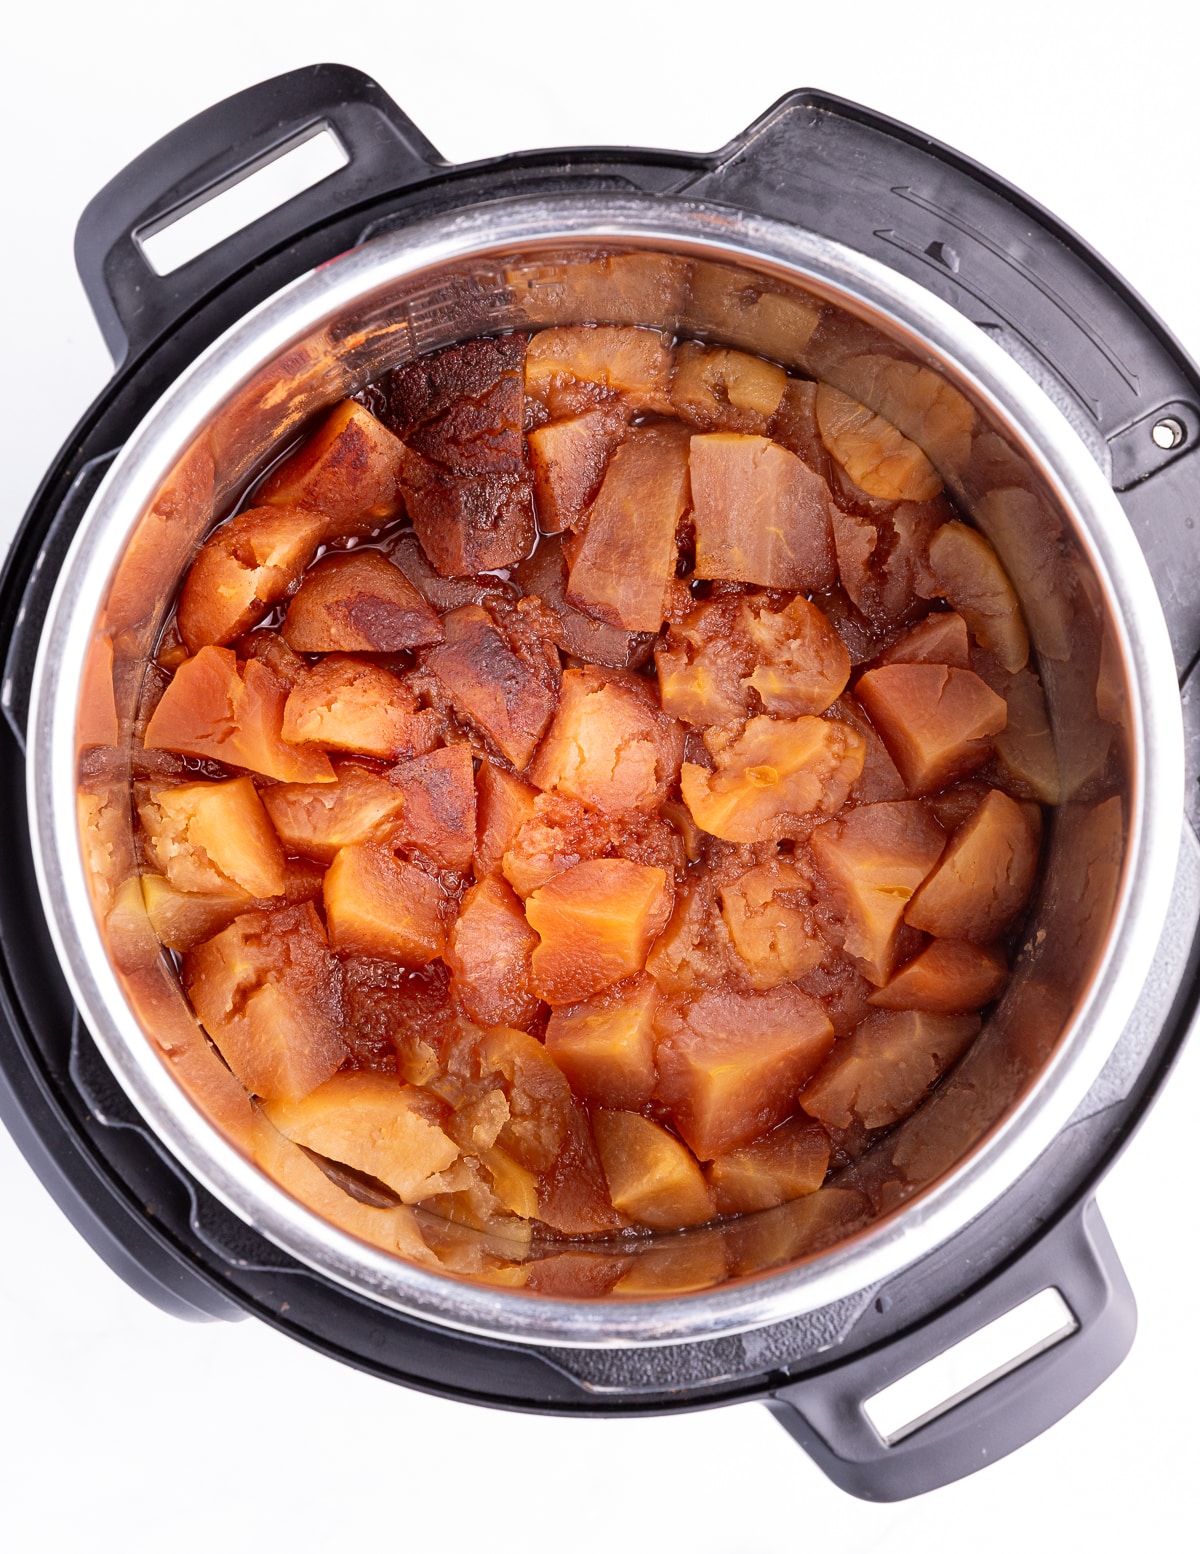 cooked apples in an Instant Pot